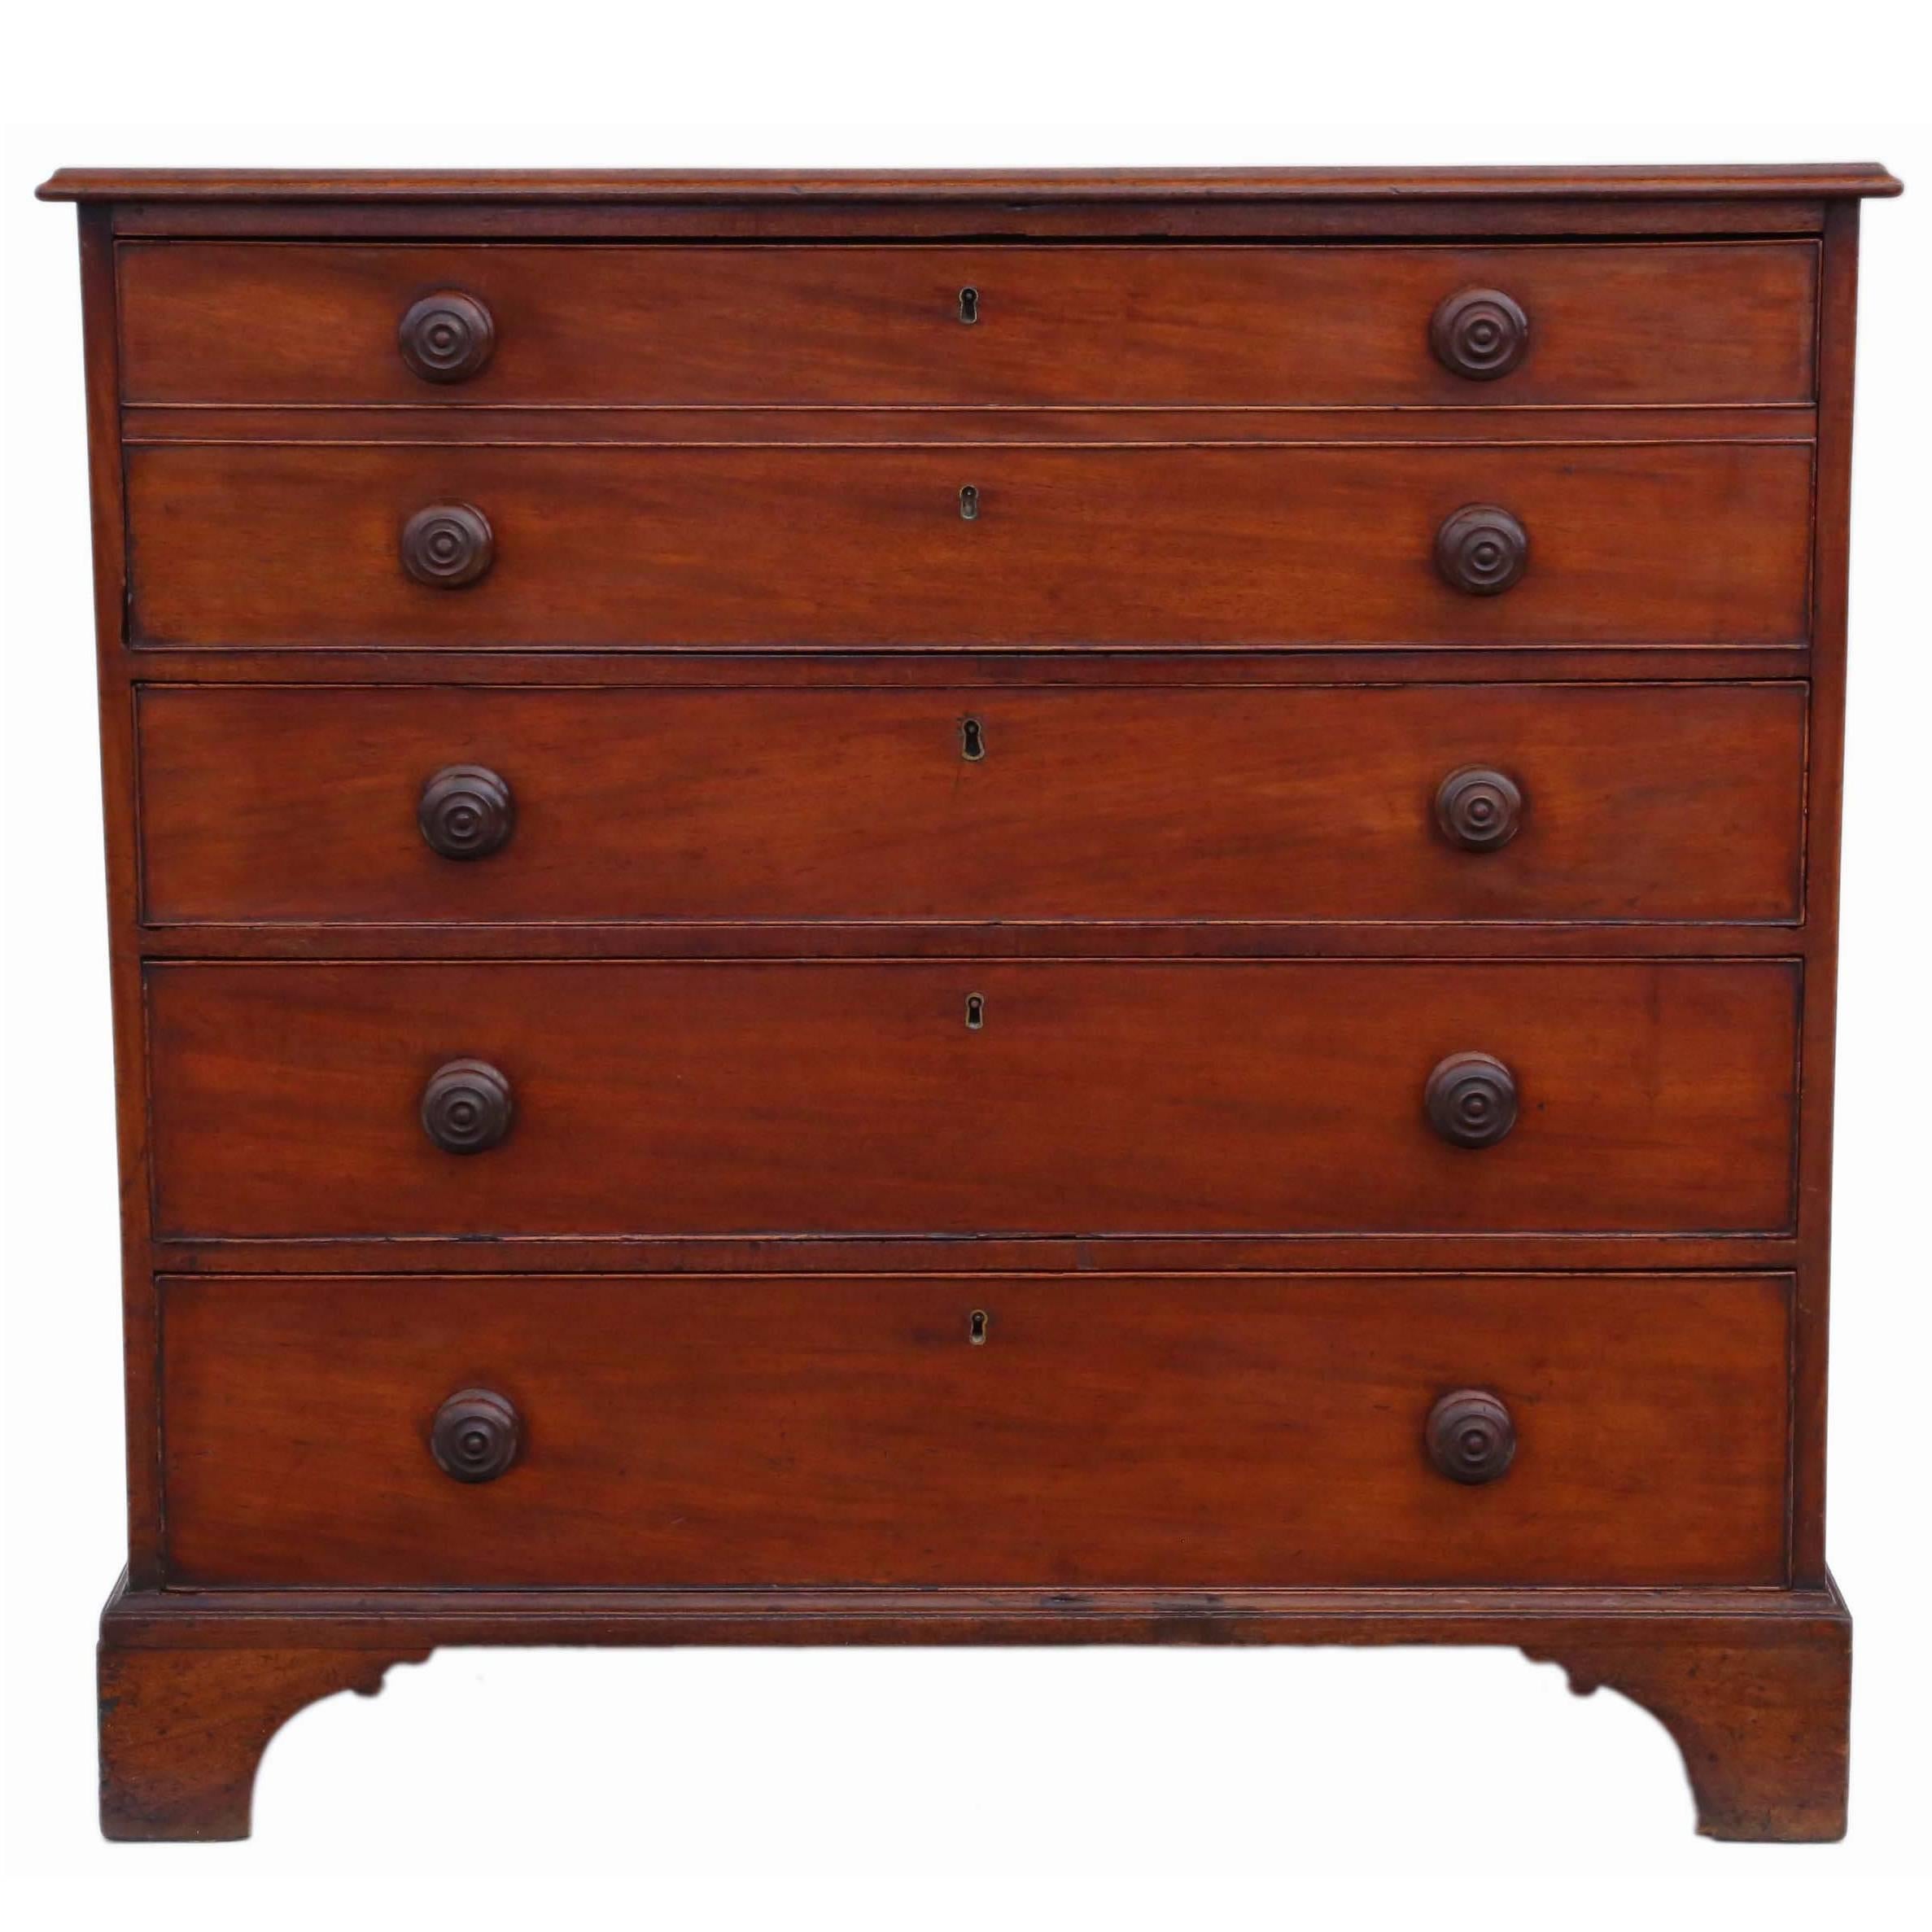 Antique Georgian Mahogany Secretaire Desk Writing Table Chest of Drawers For Sale